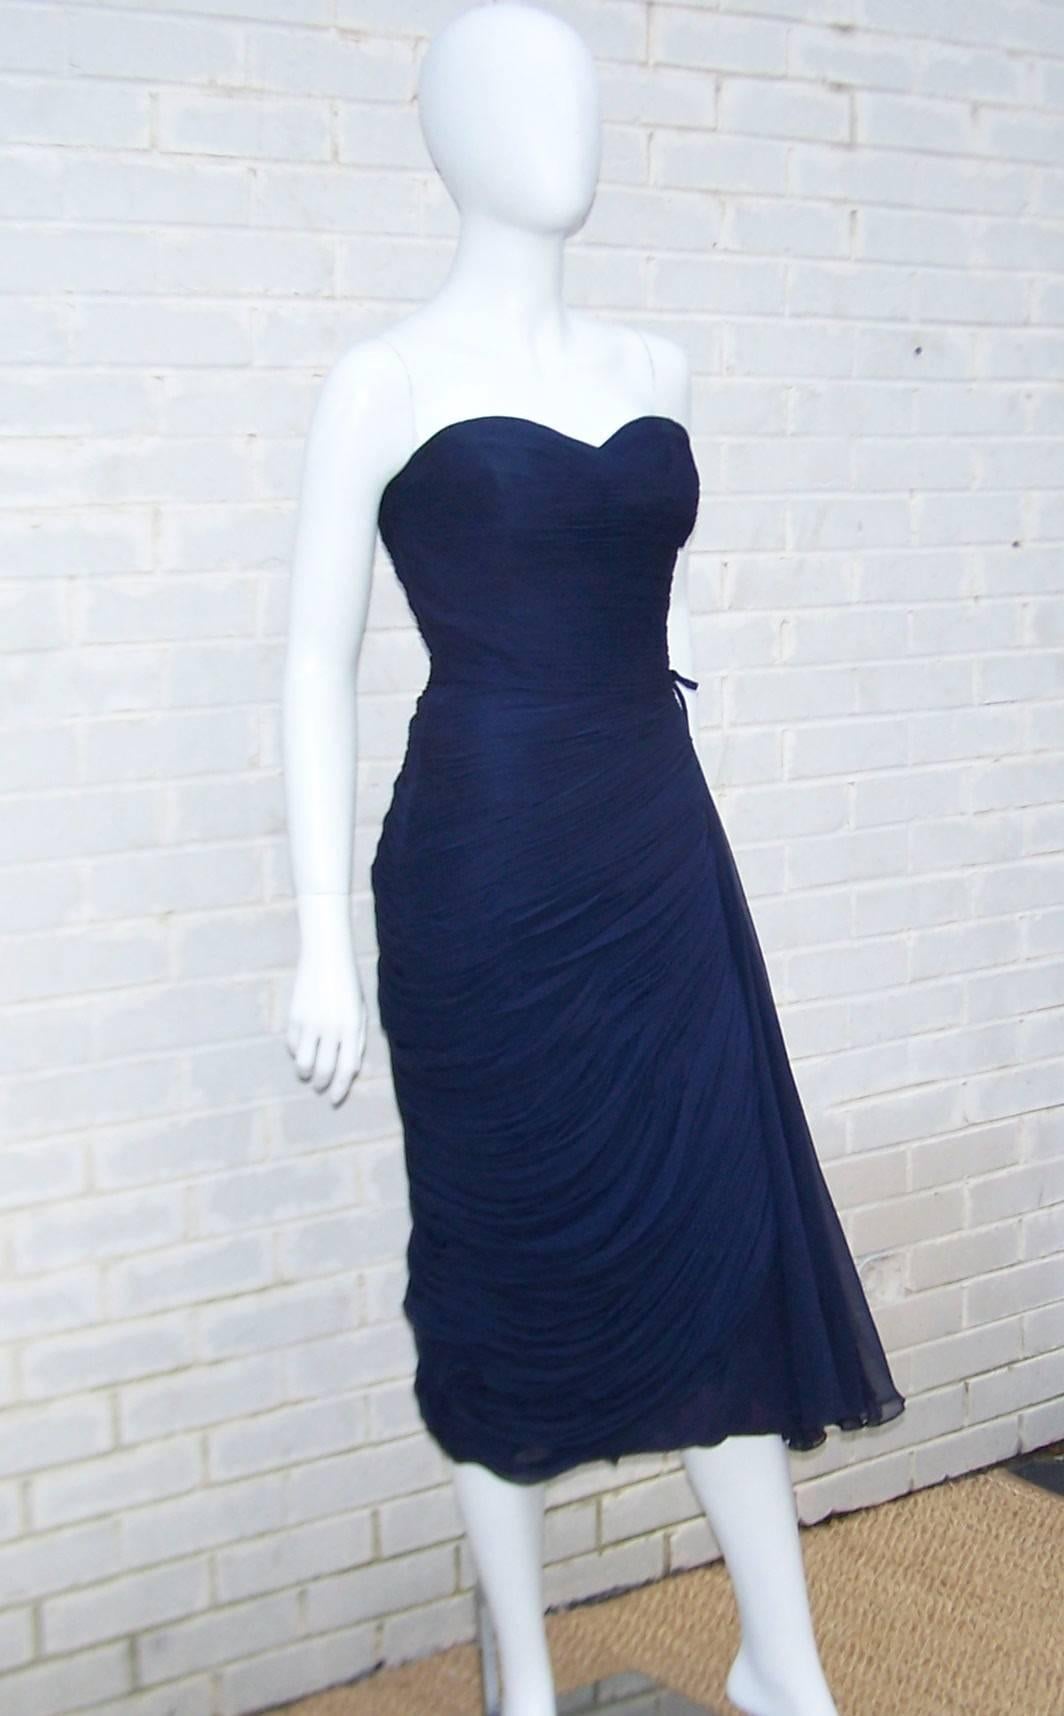 Don this 1950's strapless dress and bring out your inner goddess for an evening under the stars.  Everything about this heavenly silhouette is designed to emphasize the feminine form with dark blue silk chiffon draping and a flowing side panel which